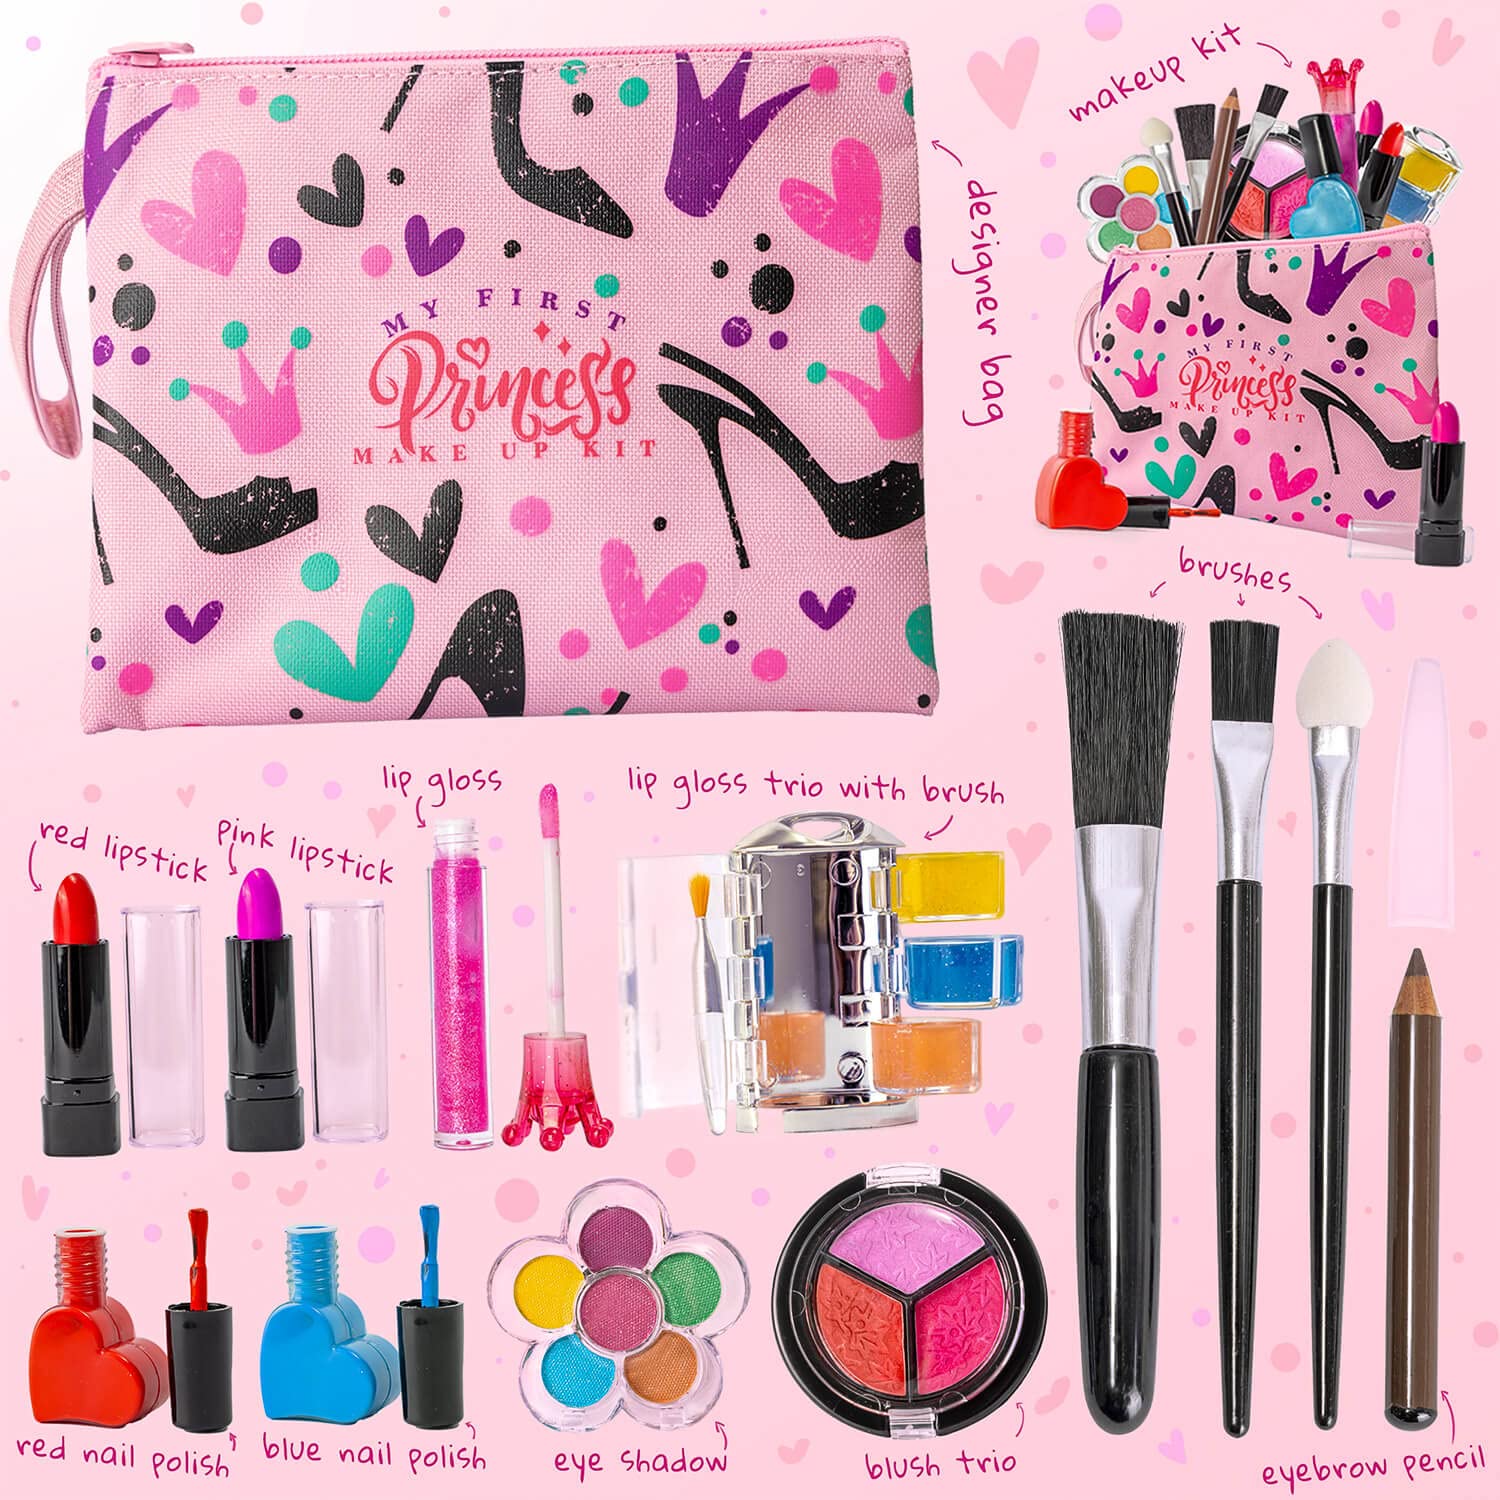 FoxPrint Kids Makeup Kit for Girls, Soft to skin, Easy to wash, 23 Pc Princess Makeup Set Toys Girls & Kids, Carrying Cosmetic Purse for Easy Storage